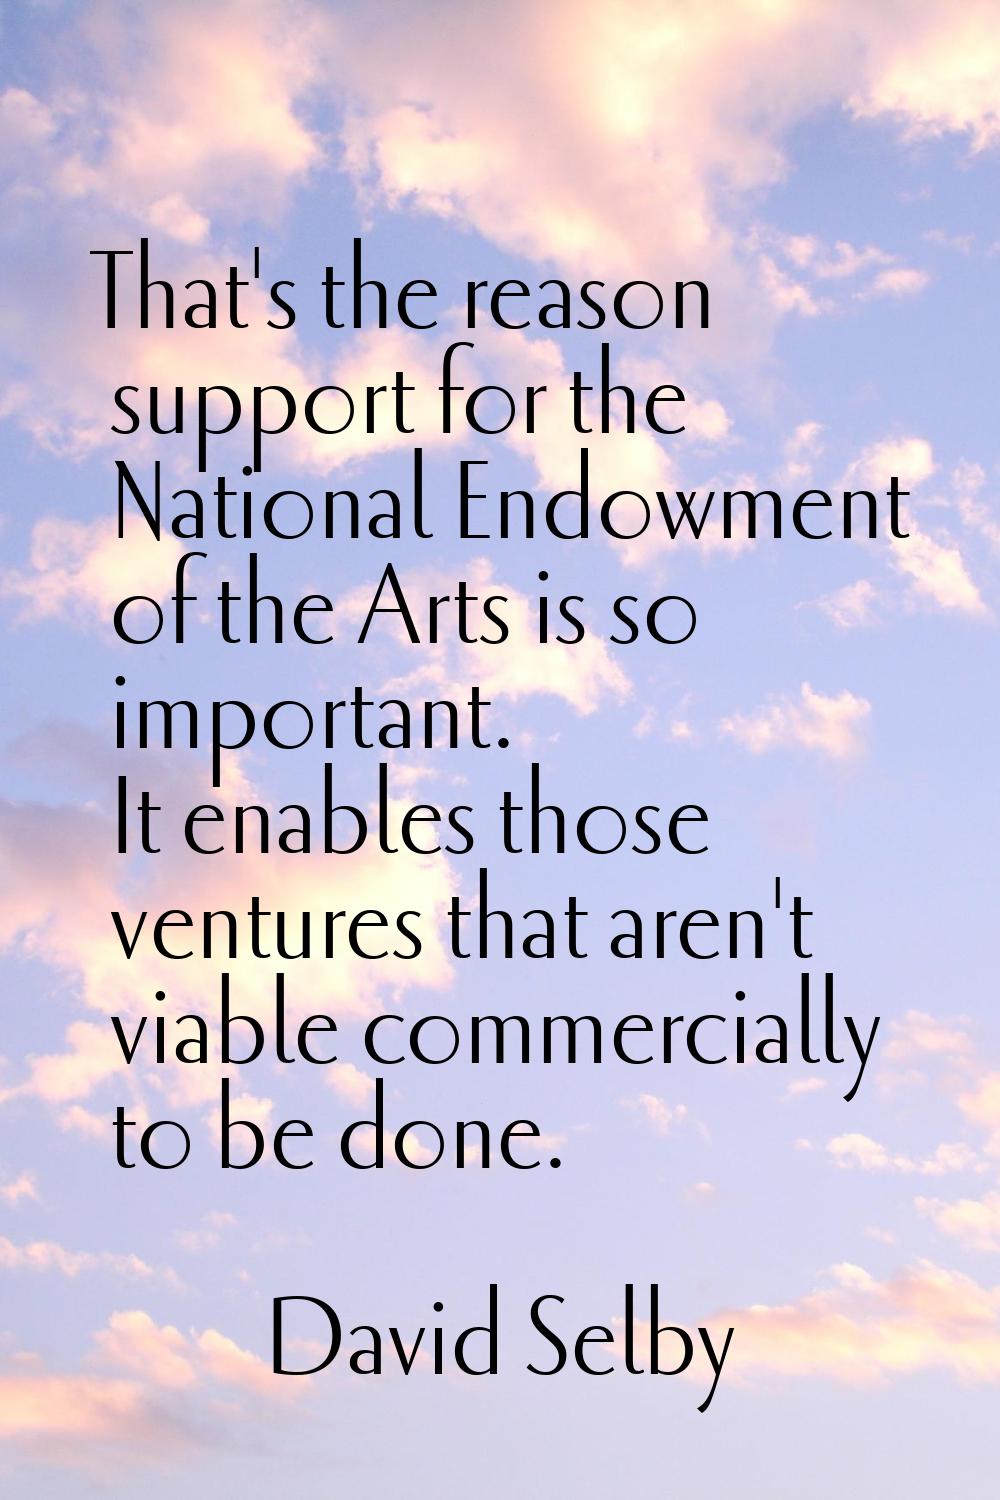 That's the reason support for the National Endowment of the Arts is so important. It enables those 